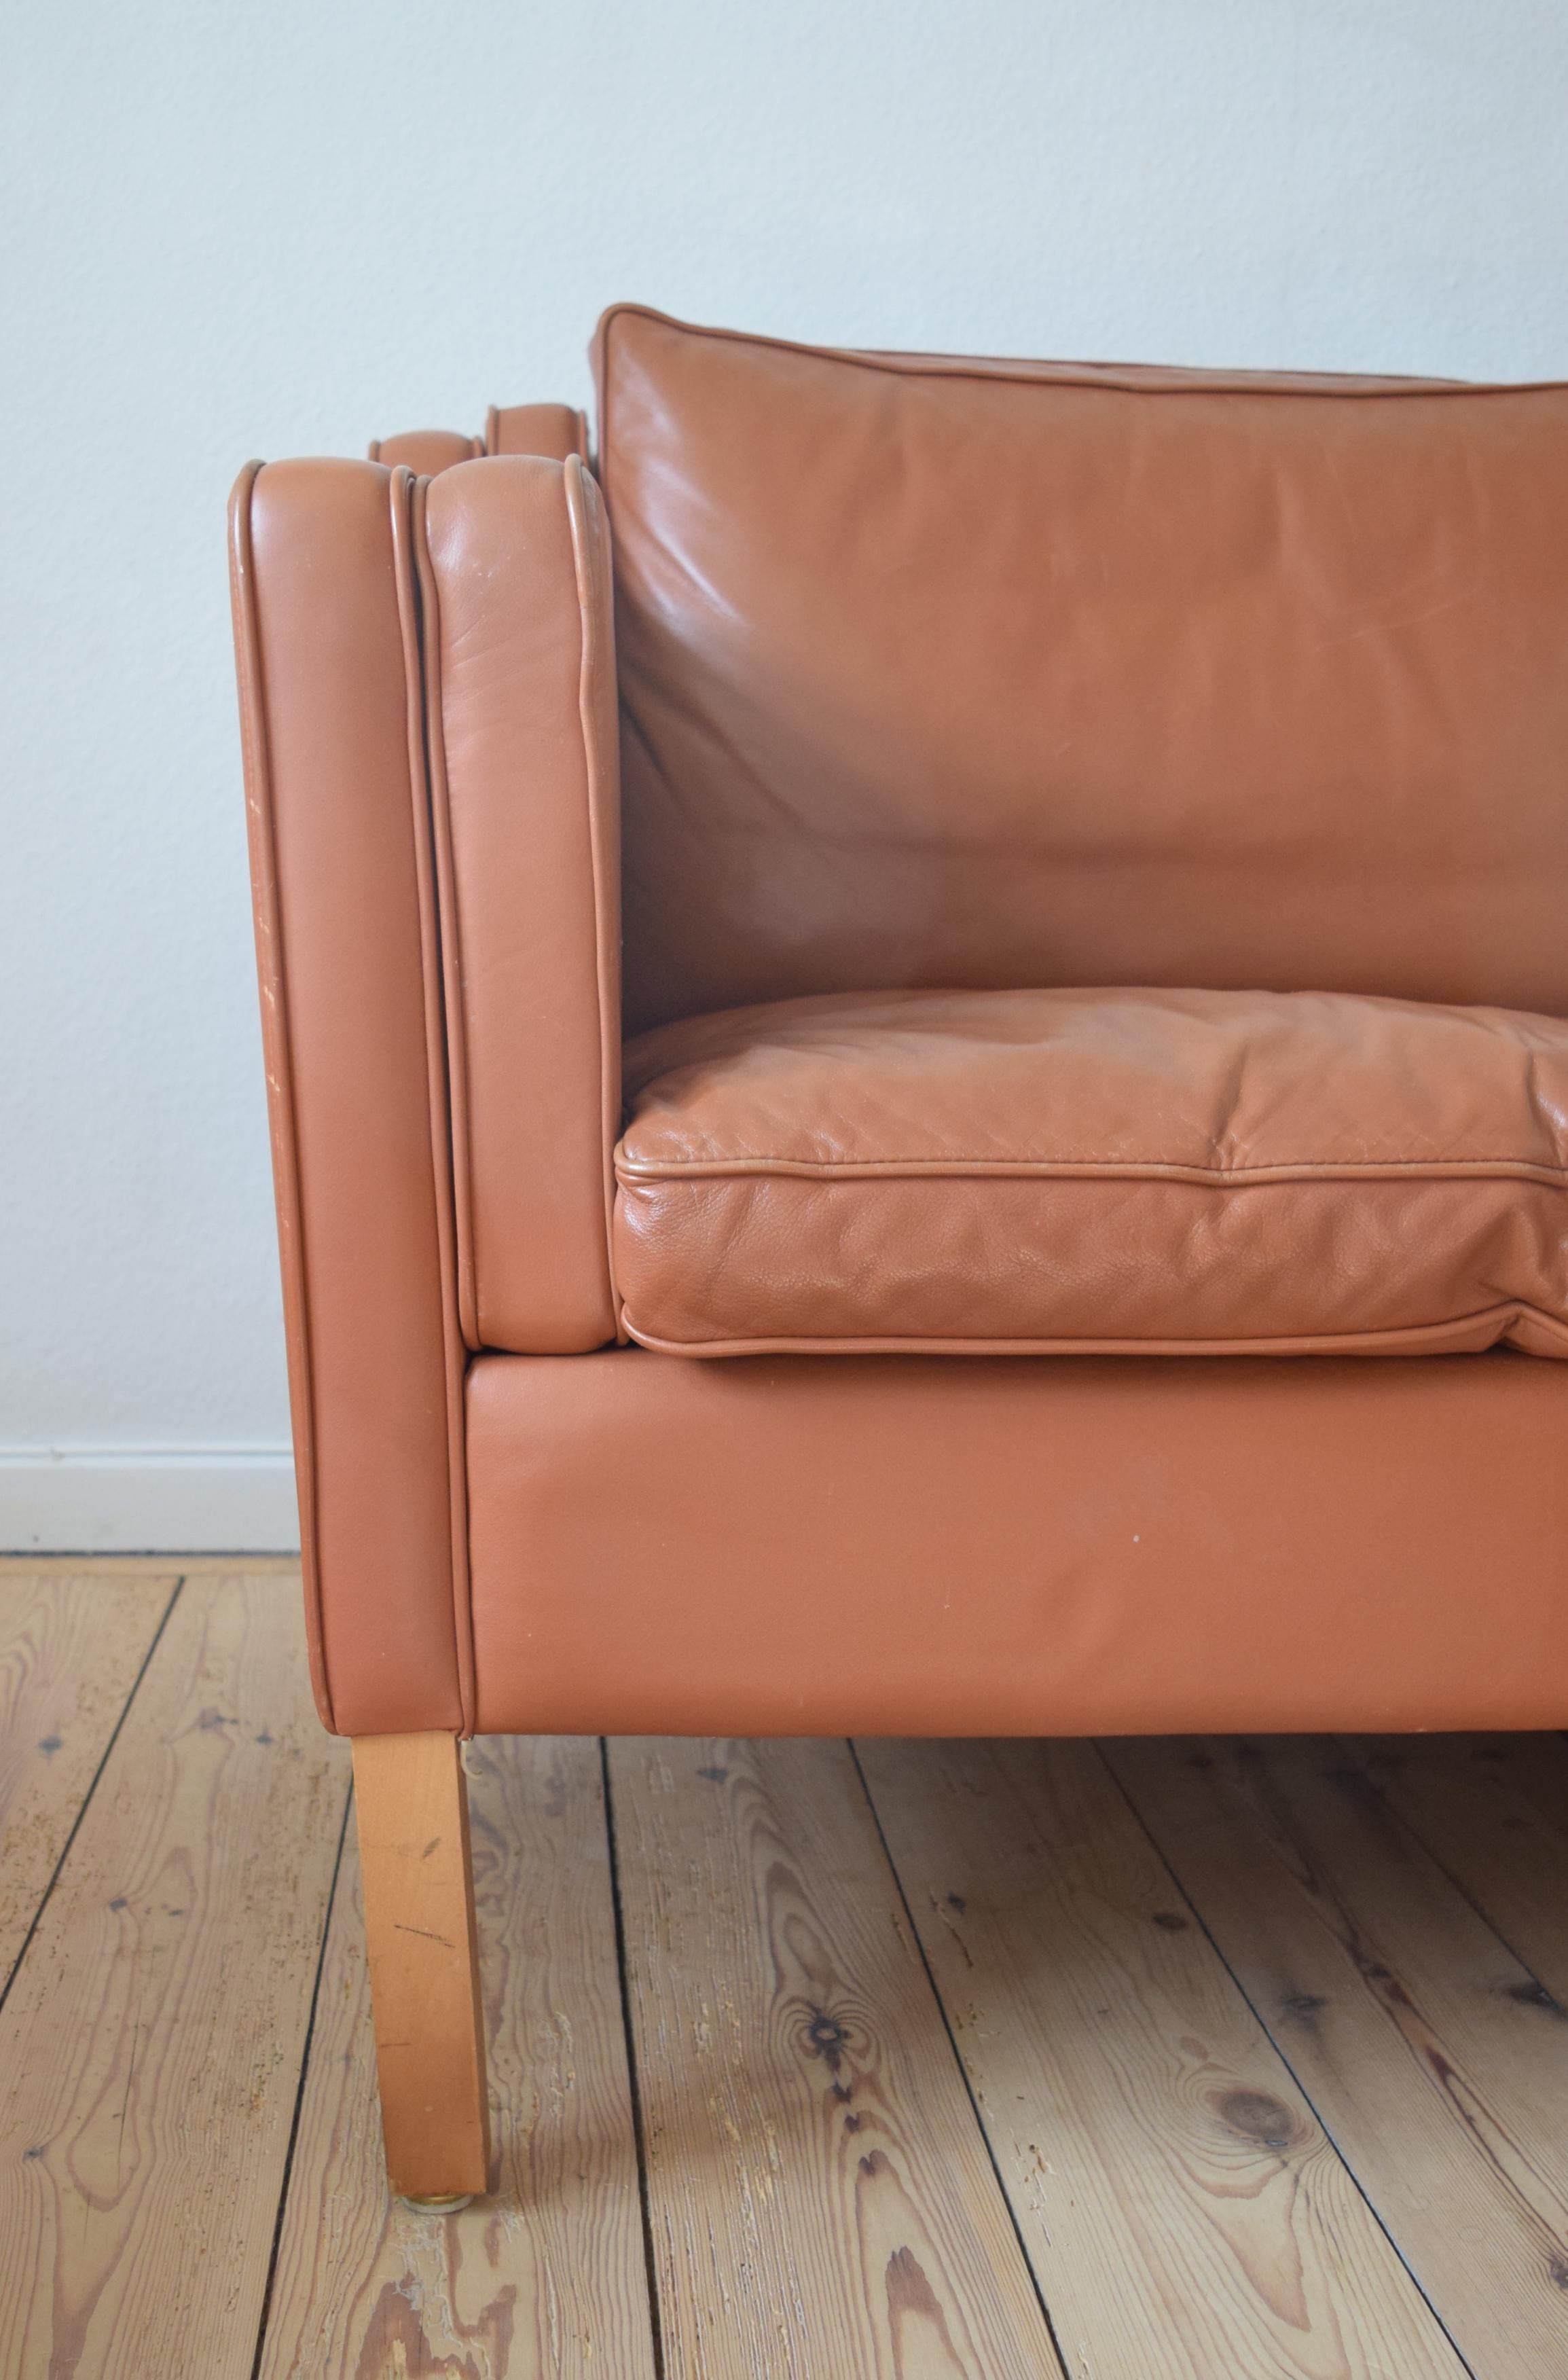 Scandinavian Modern 2 1/2-person cognac leather sofa. This sofa is covered in beautifully grained leather and sits on square beech legs. This sofa sat for many years in a Danish summer-house and shows very little wear for its age. Based on the 2213